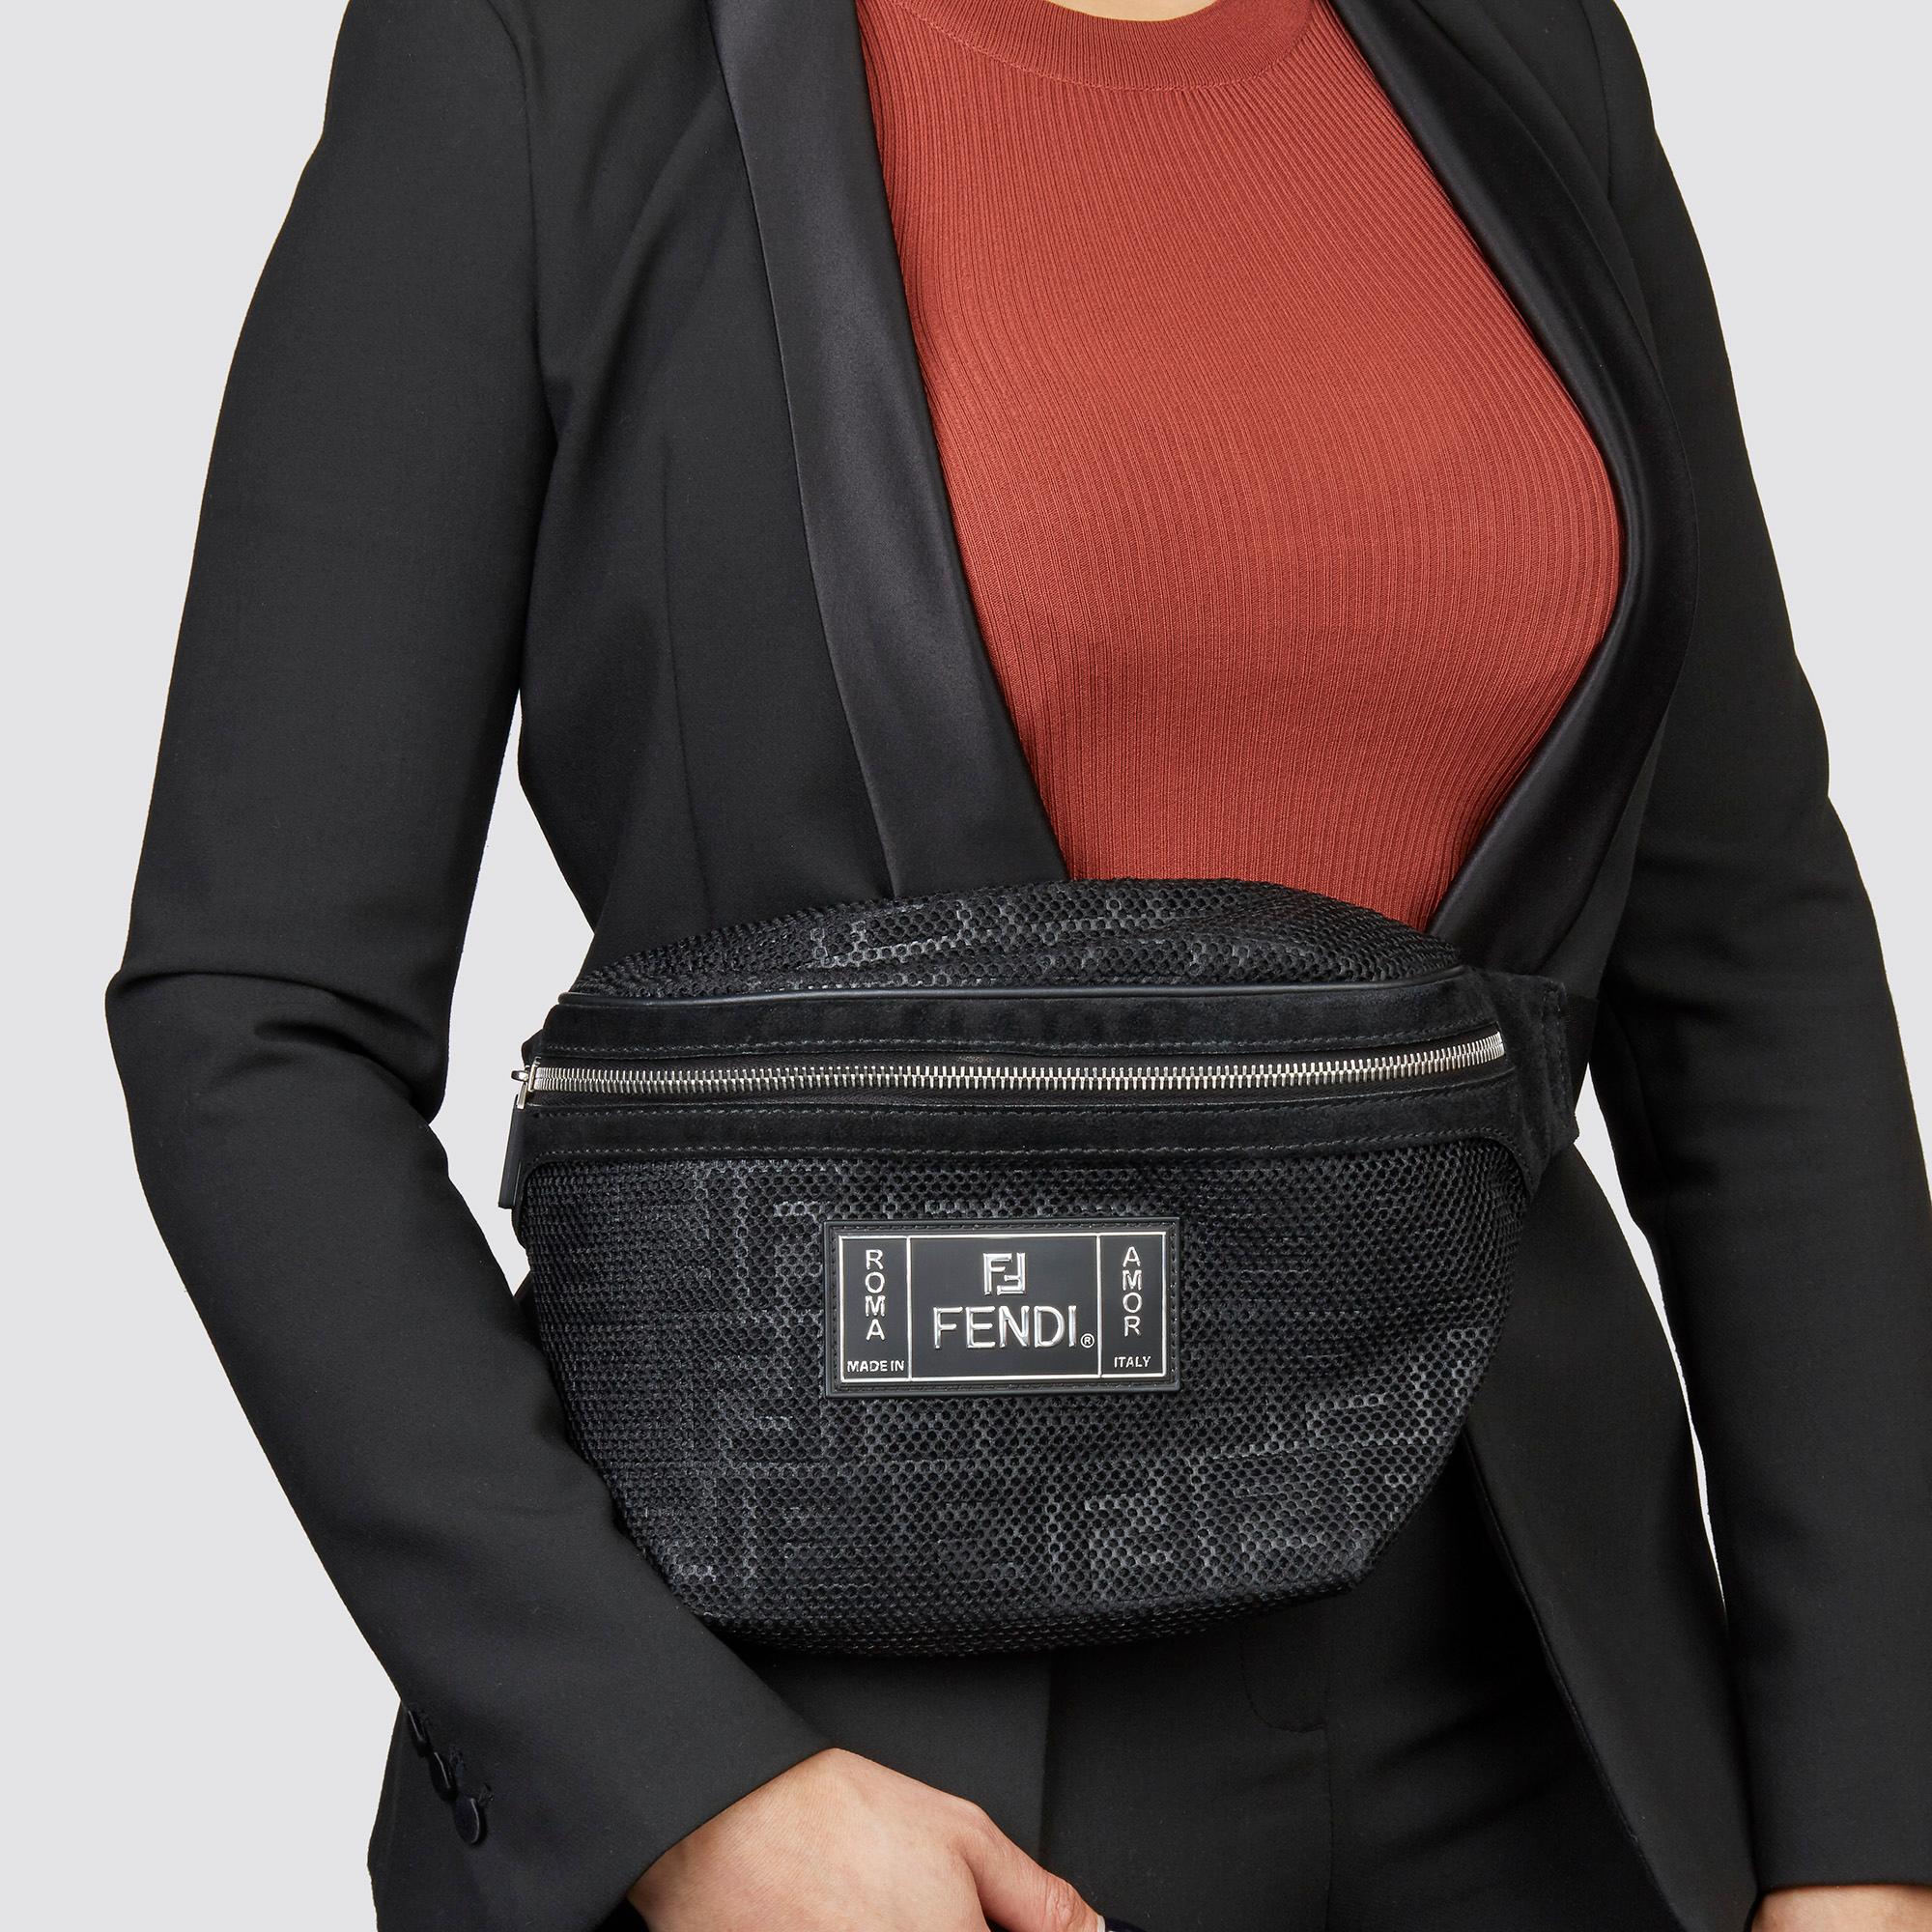 FENDI
Black Zucca Mesh & Suede Belt Bag

Serial Number: 05737275
Age (Circa): 2018
Accompanied By: Tag
Authenticity Details: Serial Stamp (Made in Italy)
Gender: Unisex
Type: Belt Bag

Colour: Black
Hardware: Silver
Material(s): Mesh,